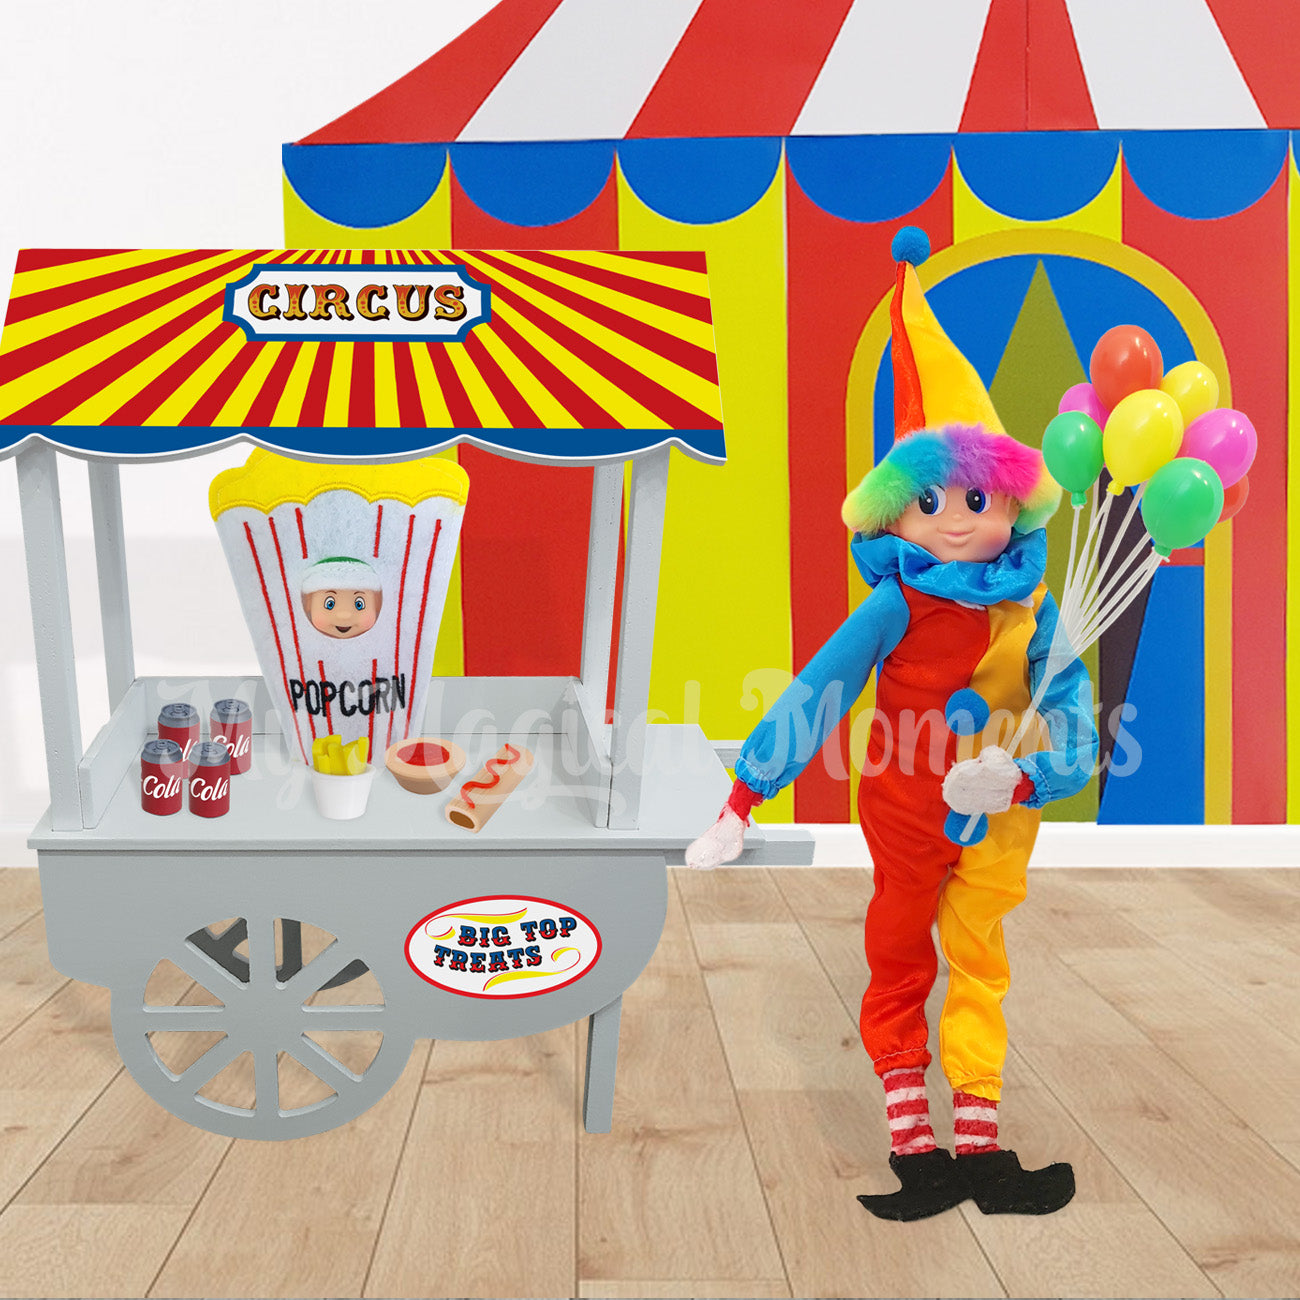 Elf dressed as a clown selling snacks at a circus